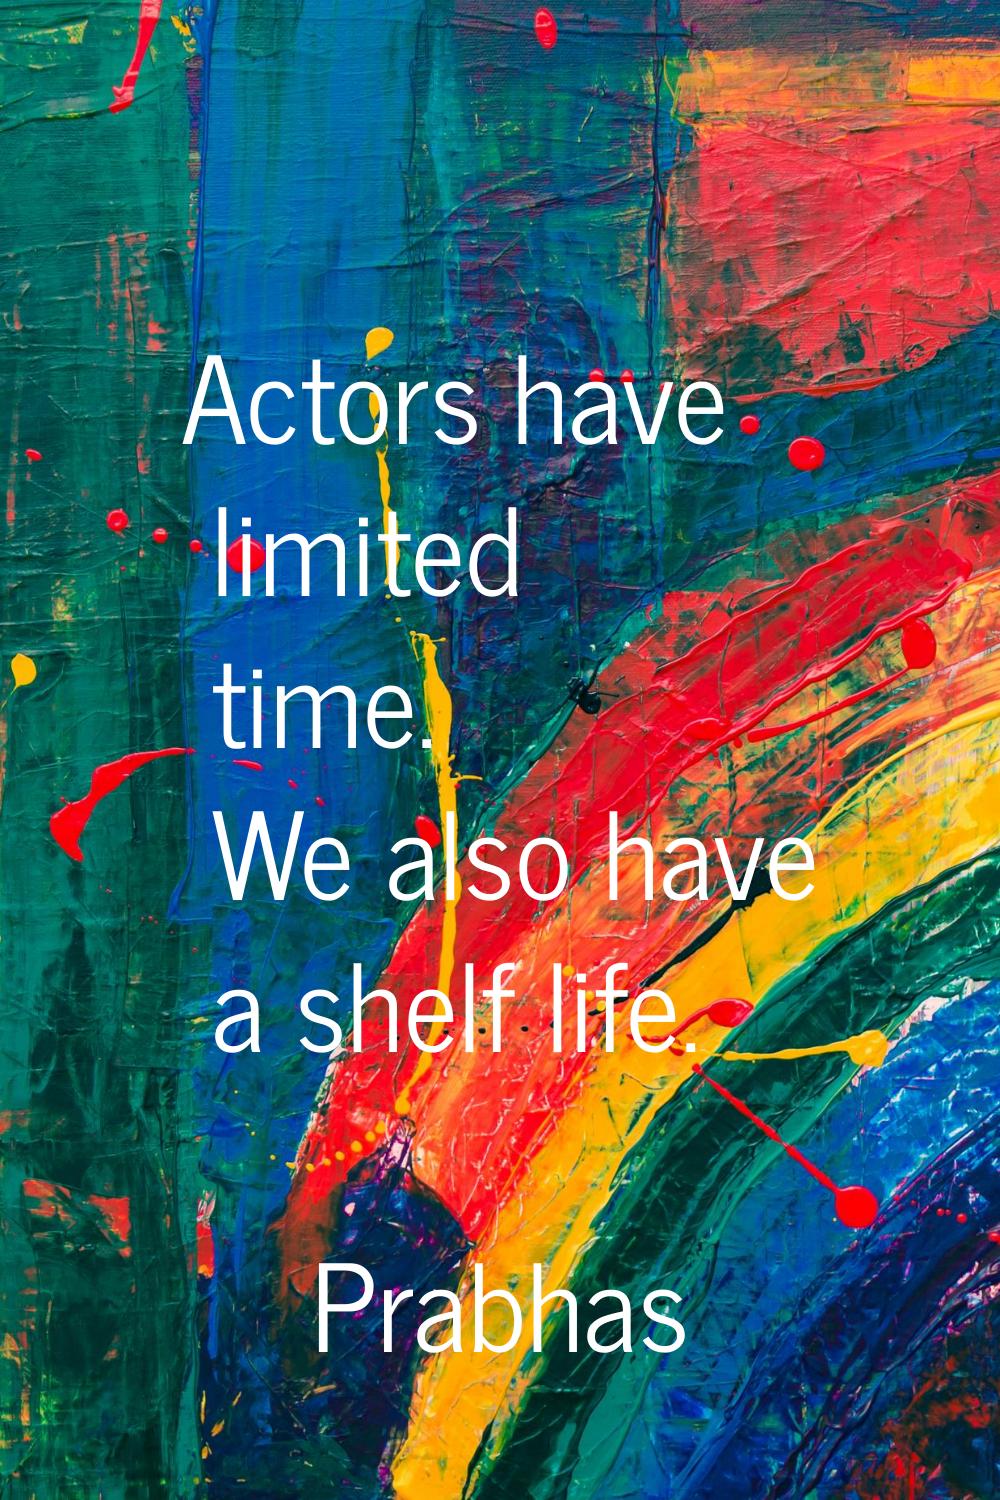 Actors have limited time. We also have a shelf life.